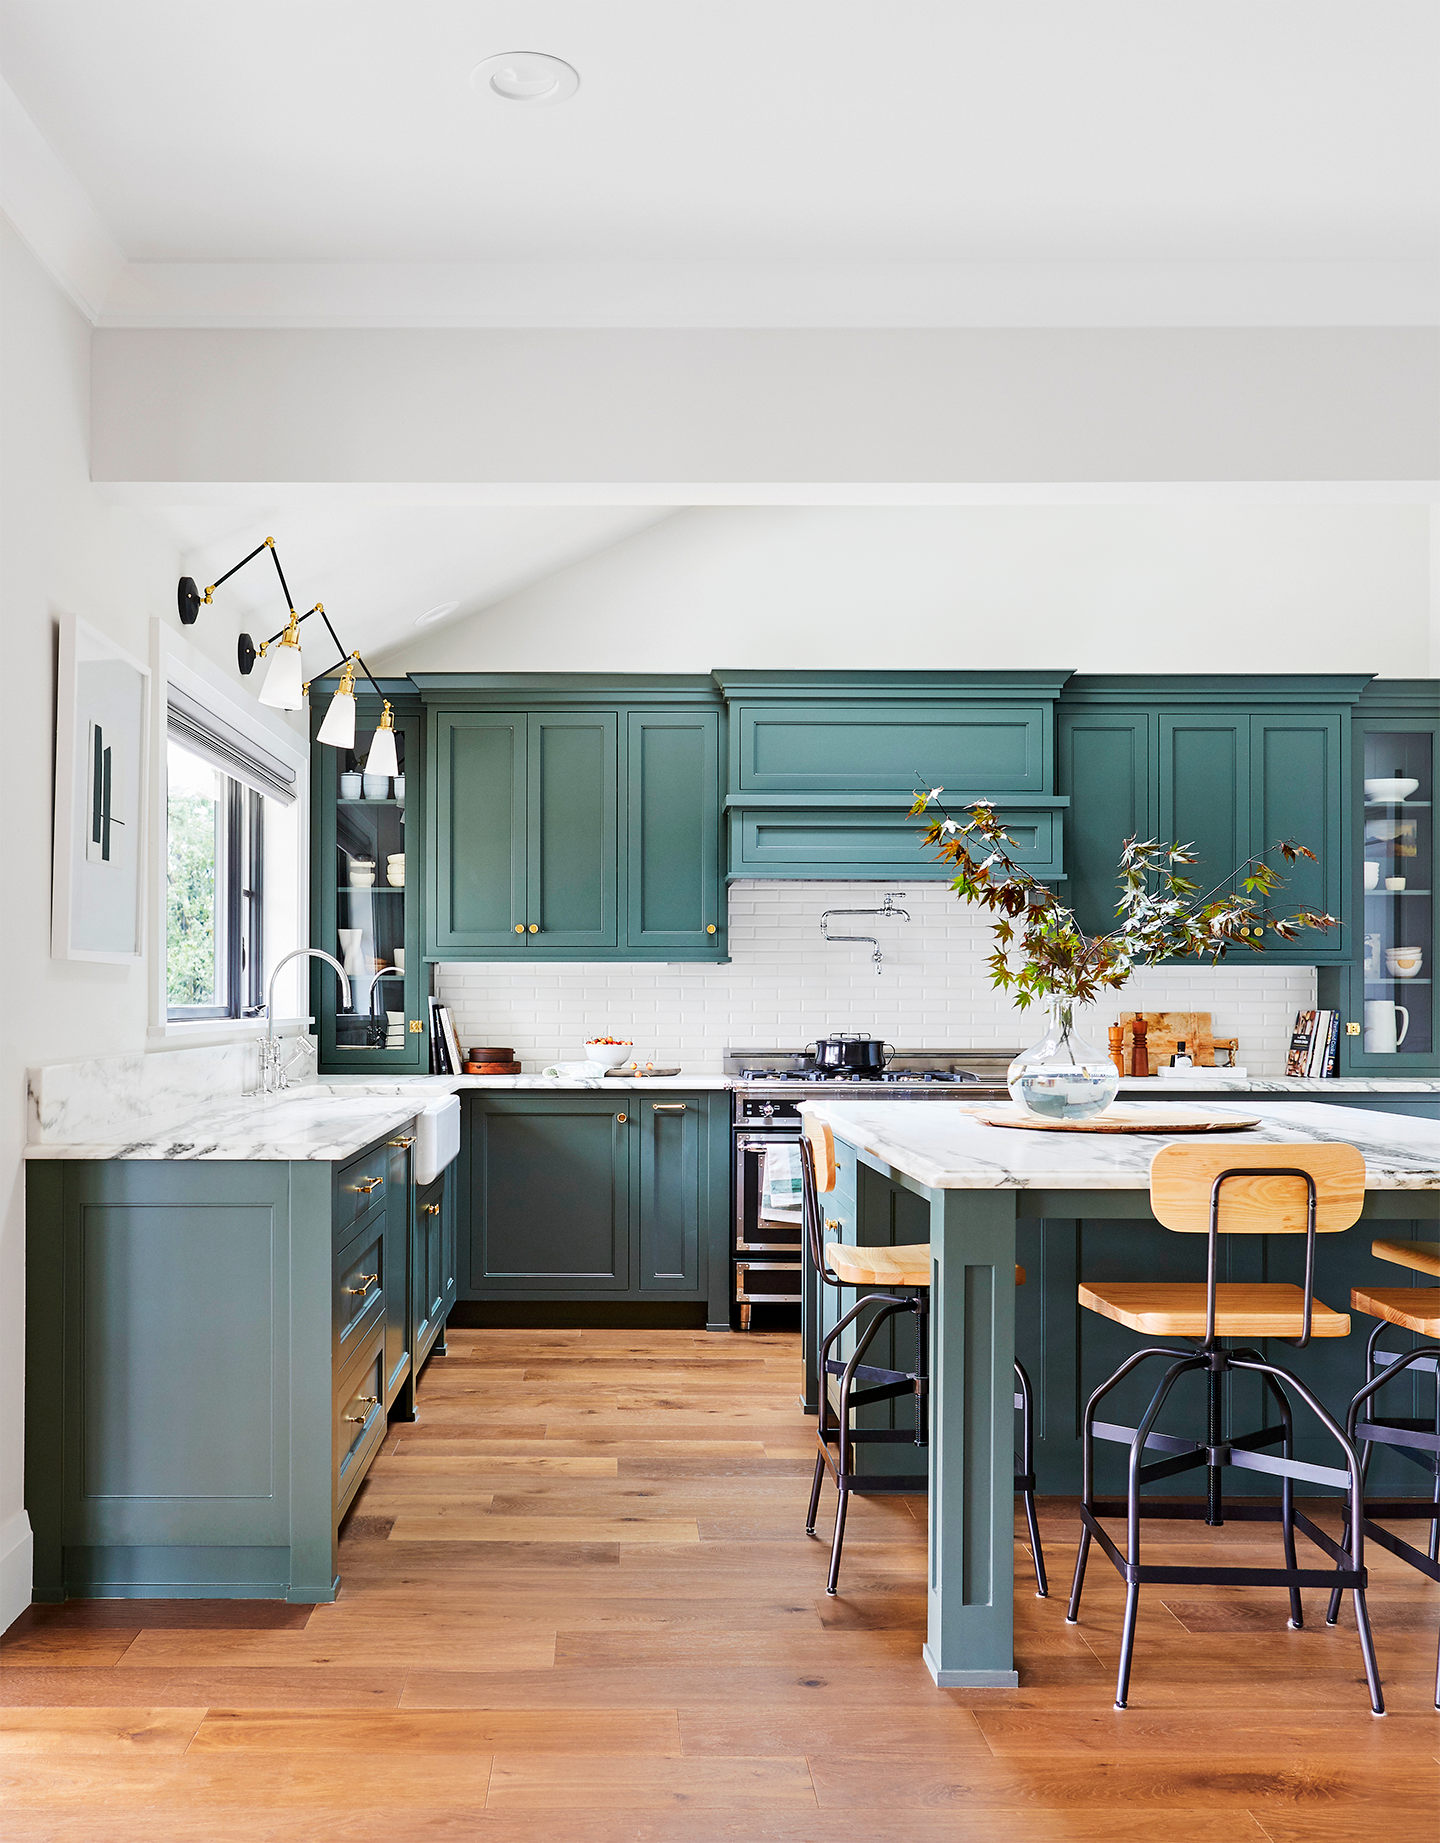 90 Gorgeous Kitchen Design Ideas You’ll Want to Steal Immediately